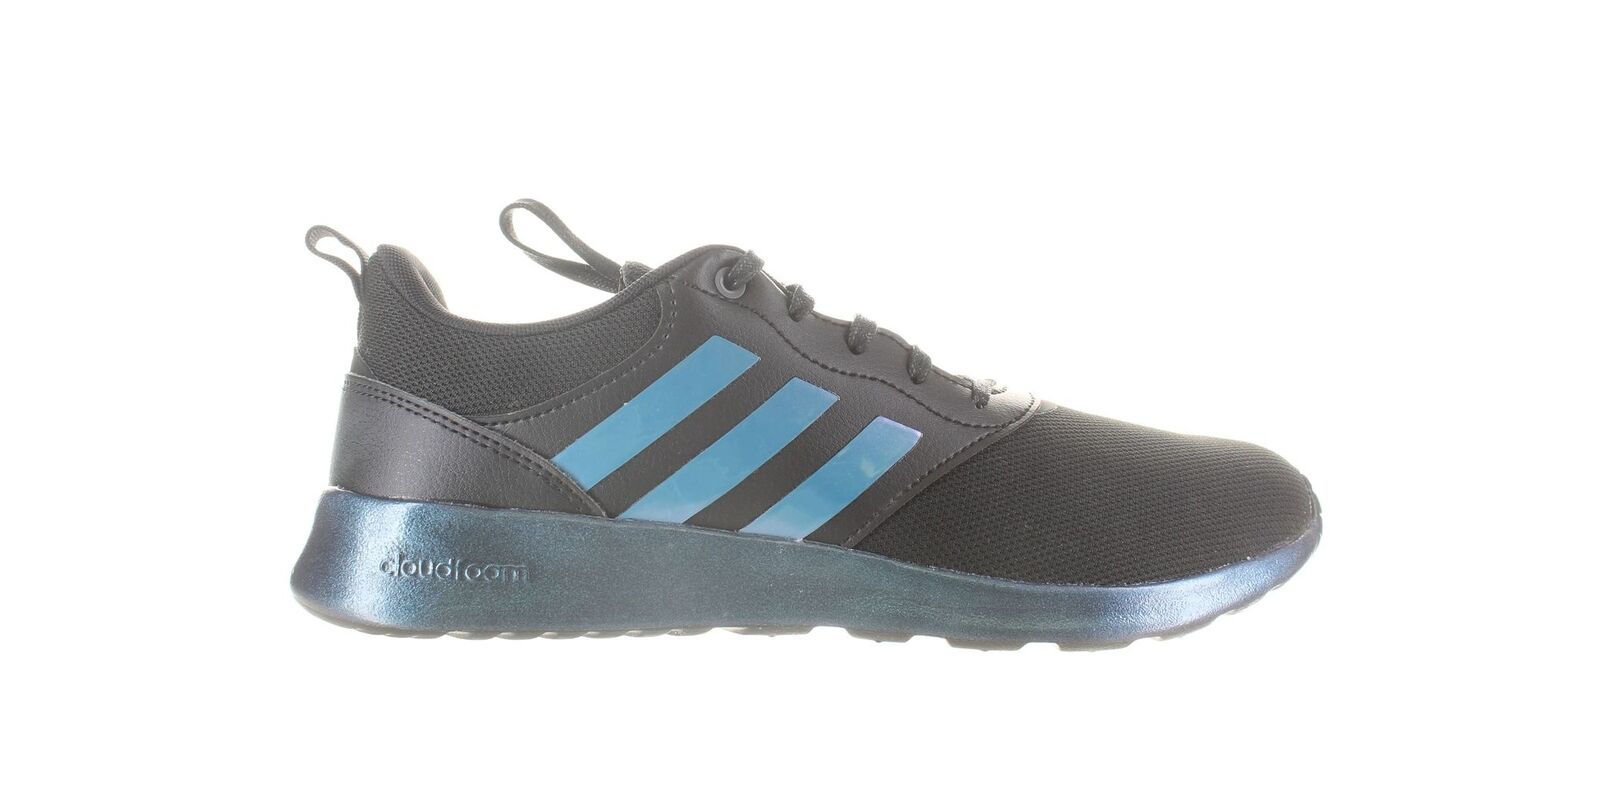 Adidas Womens Qt Racer Black Running Shoes Size 8.5 (7613199)